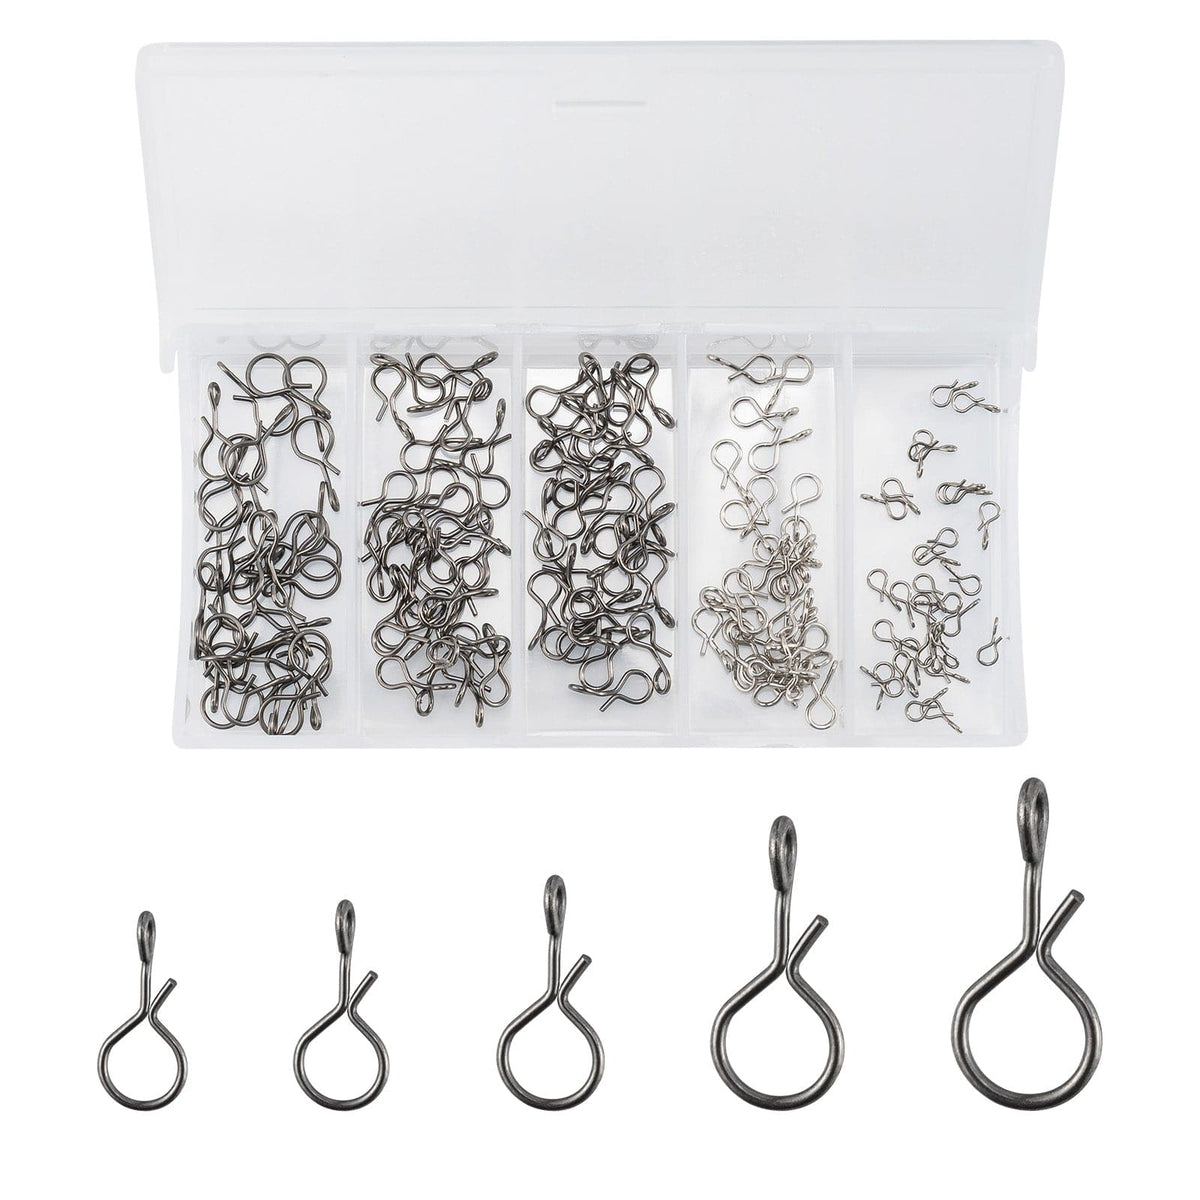 Eupheng Quick Change Fly Fishing Snaps Stainless Steel, Fishing swivels,  Fast Easy & Secure, Hook Snaps for Flies, Jigs, Lures, Great Value Pack